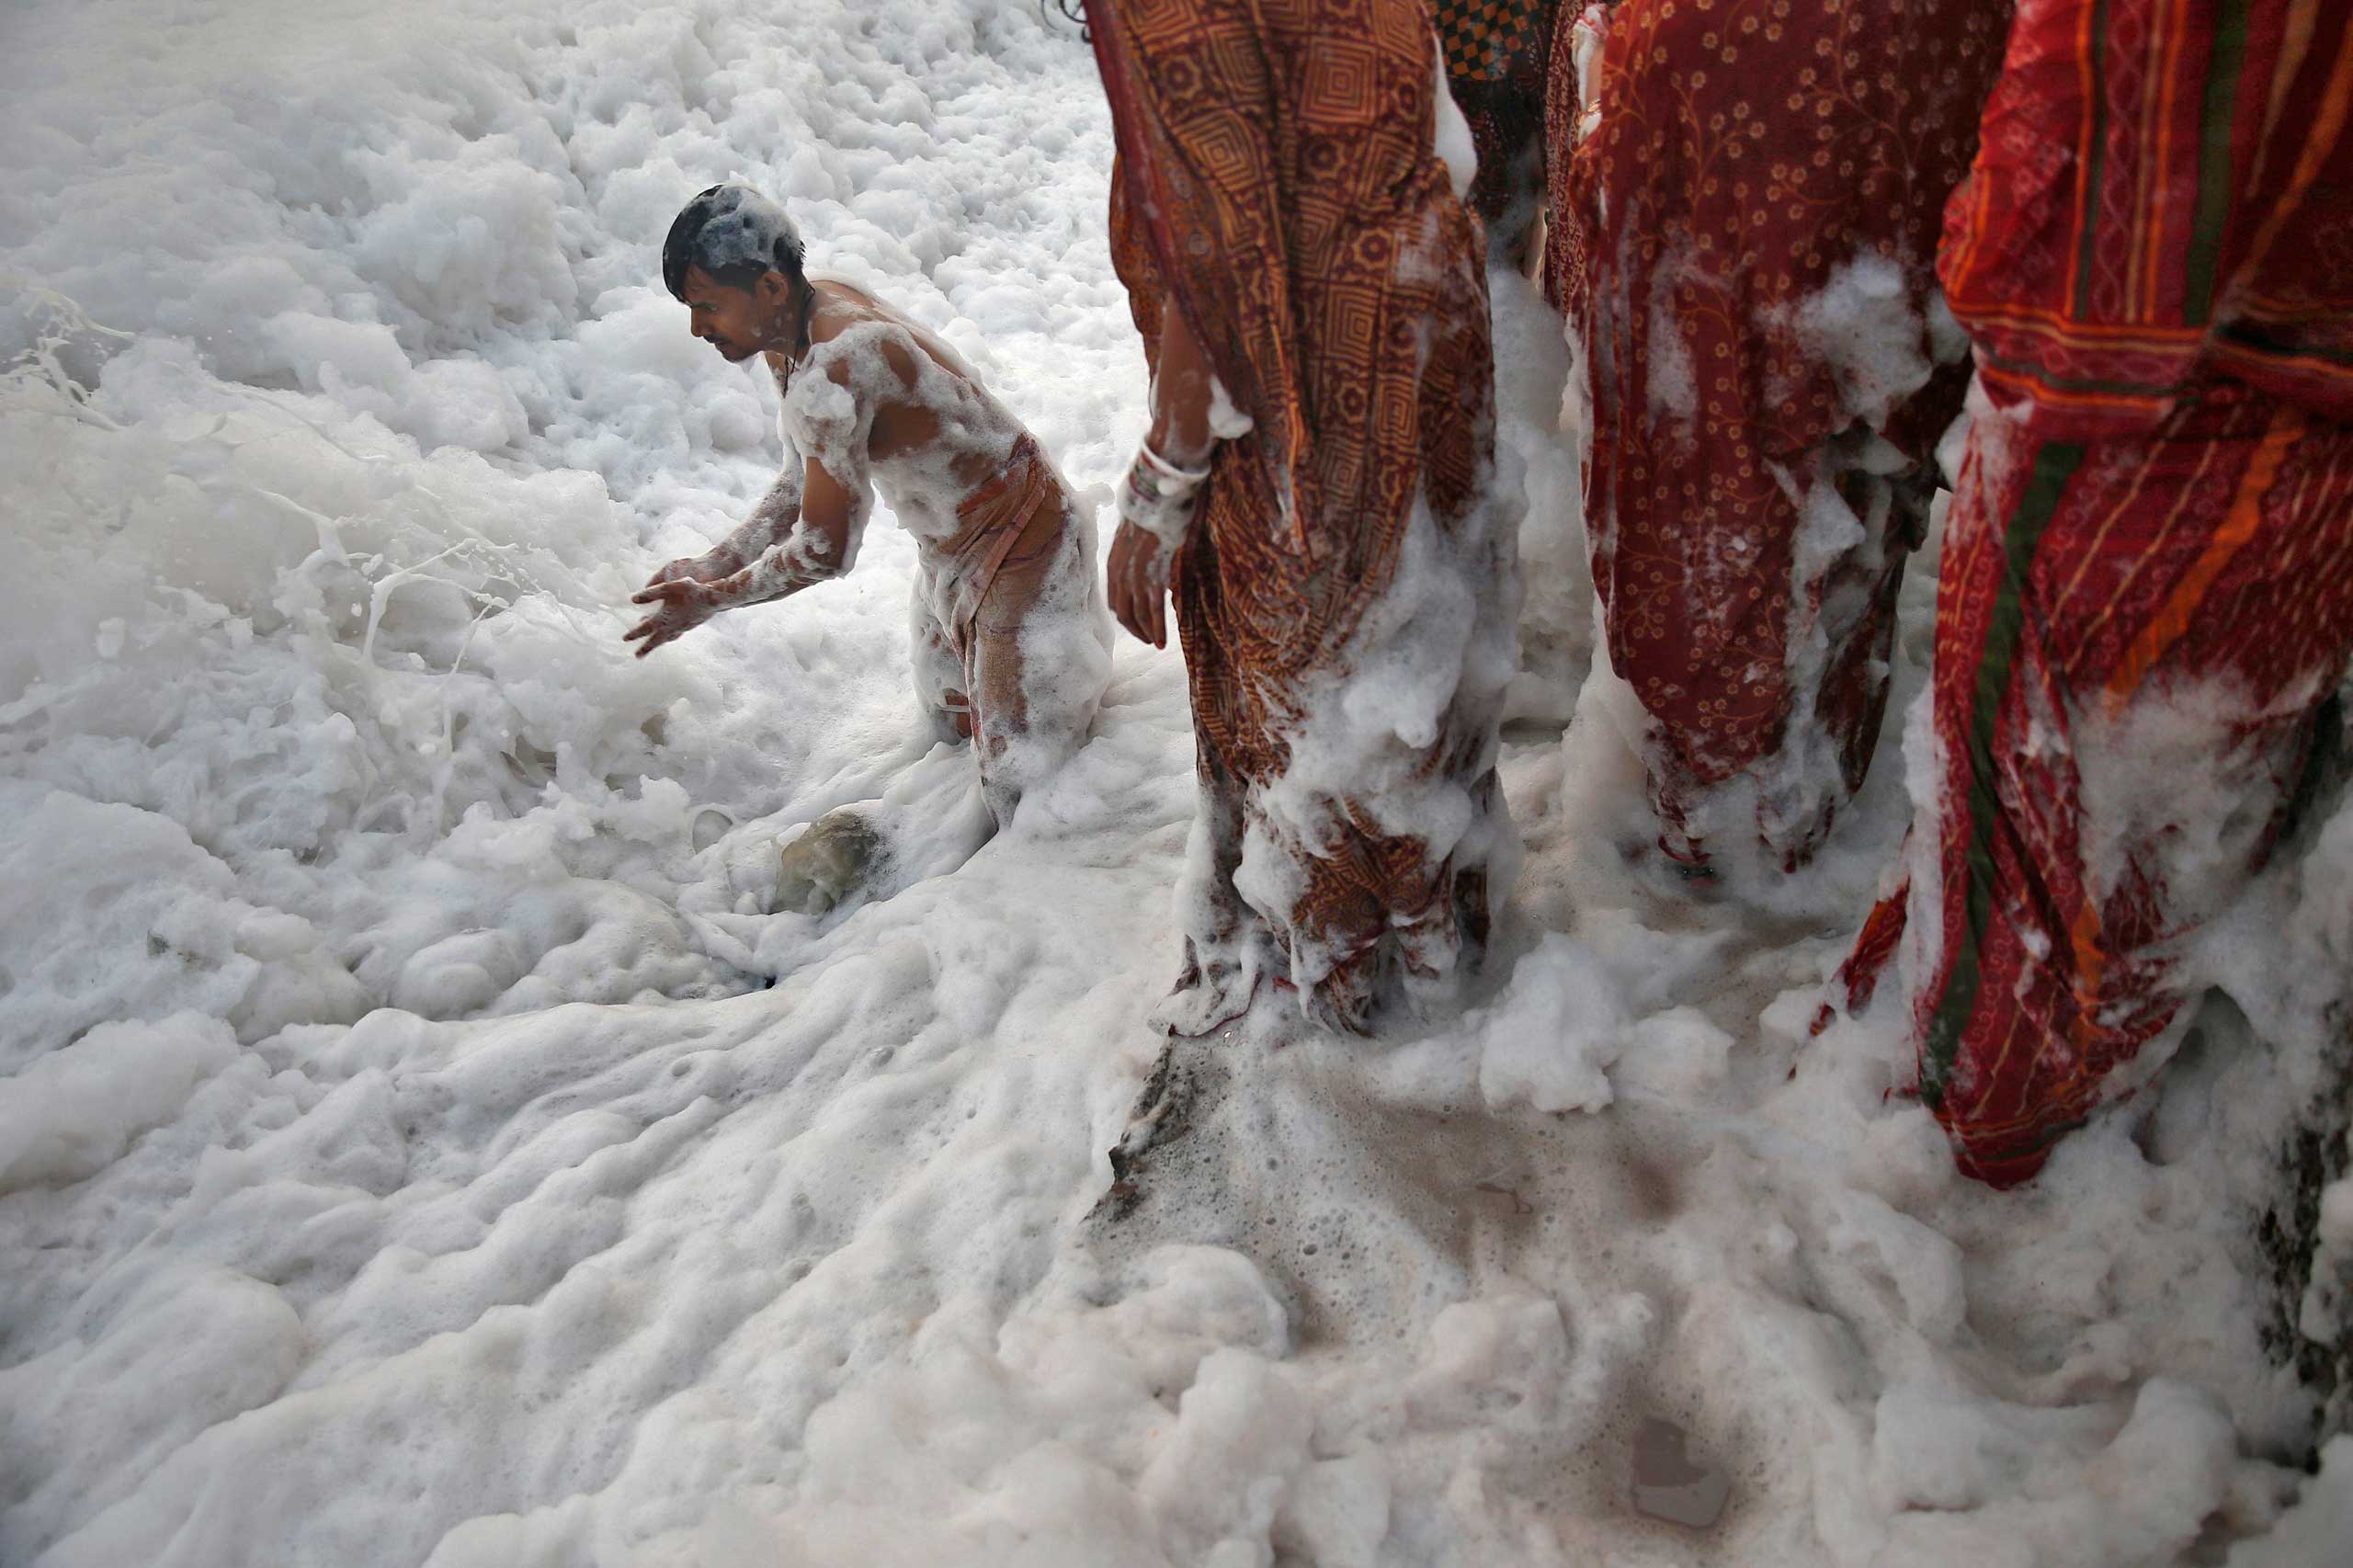 Oct. 30, 2014. A Hindu devotee pushes the foam away to make space for other devotees to worship the Sun god Surya in the polluted waters of the river Yamuna during the Hindu religious festival of Chatt Puja in New Delhi. Hindu women fast for the whole day for the betterment of their family and the society during the festival.